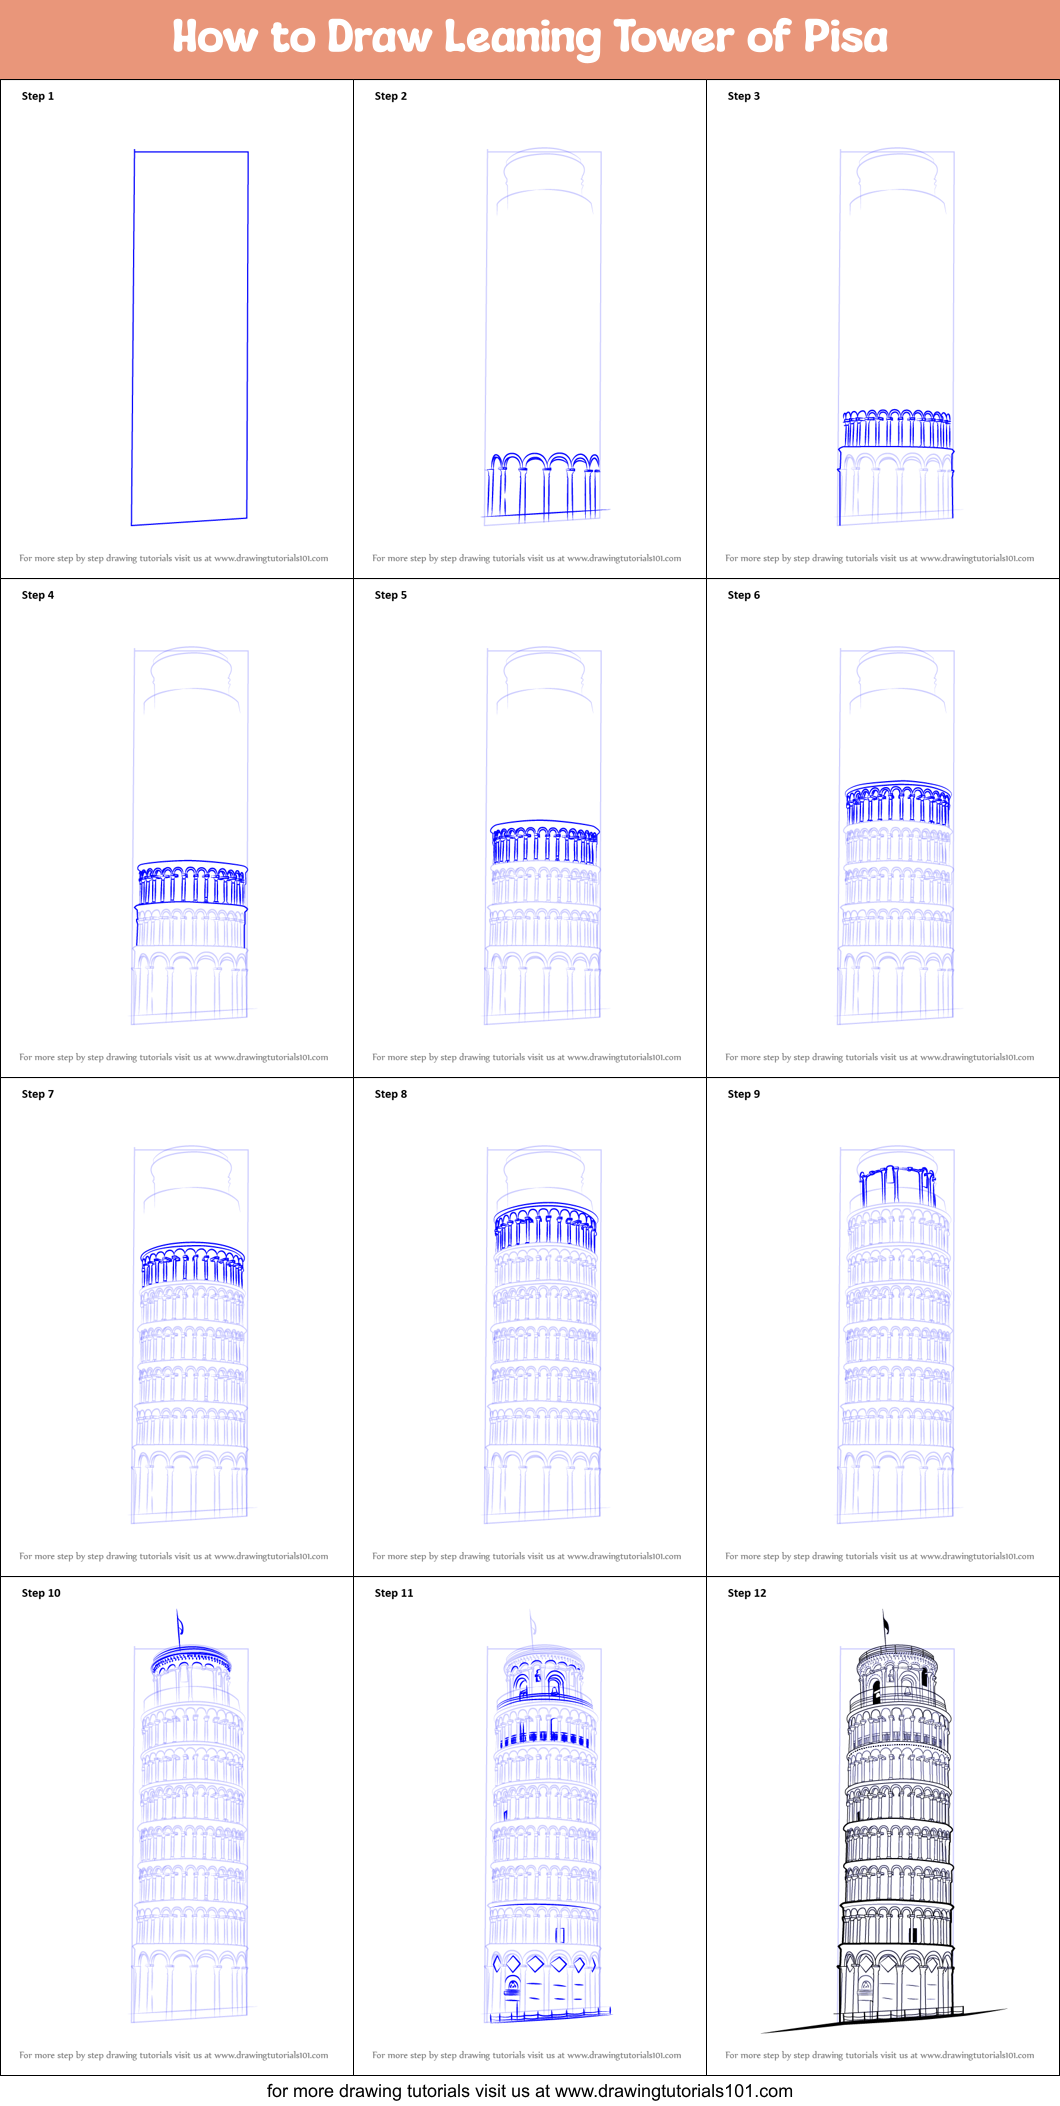 How to Draw Leaning Tower of Pisa printable step by step drawing sheet